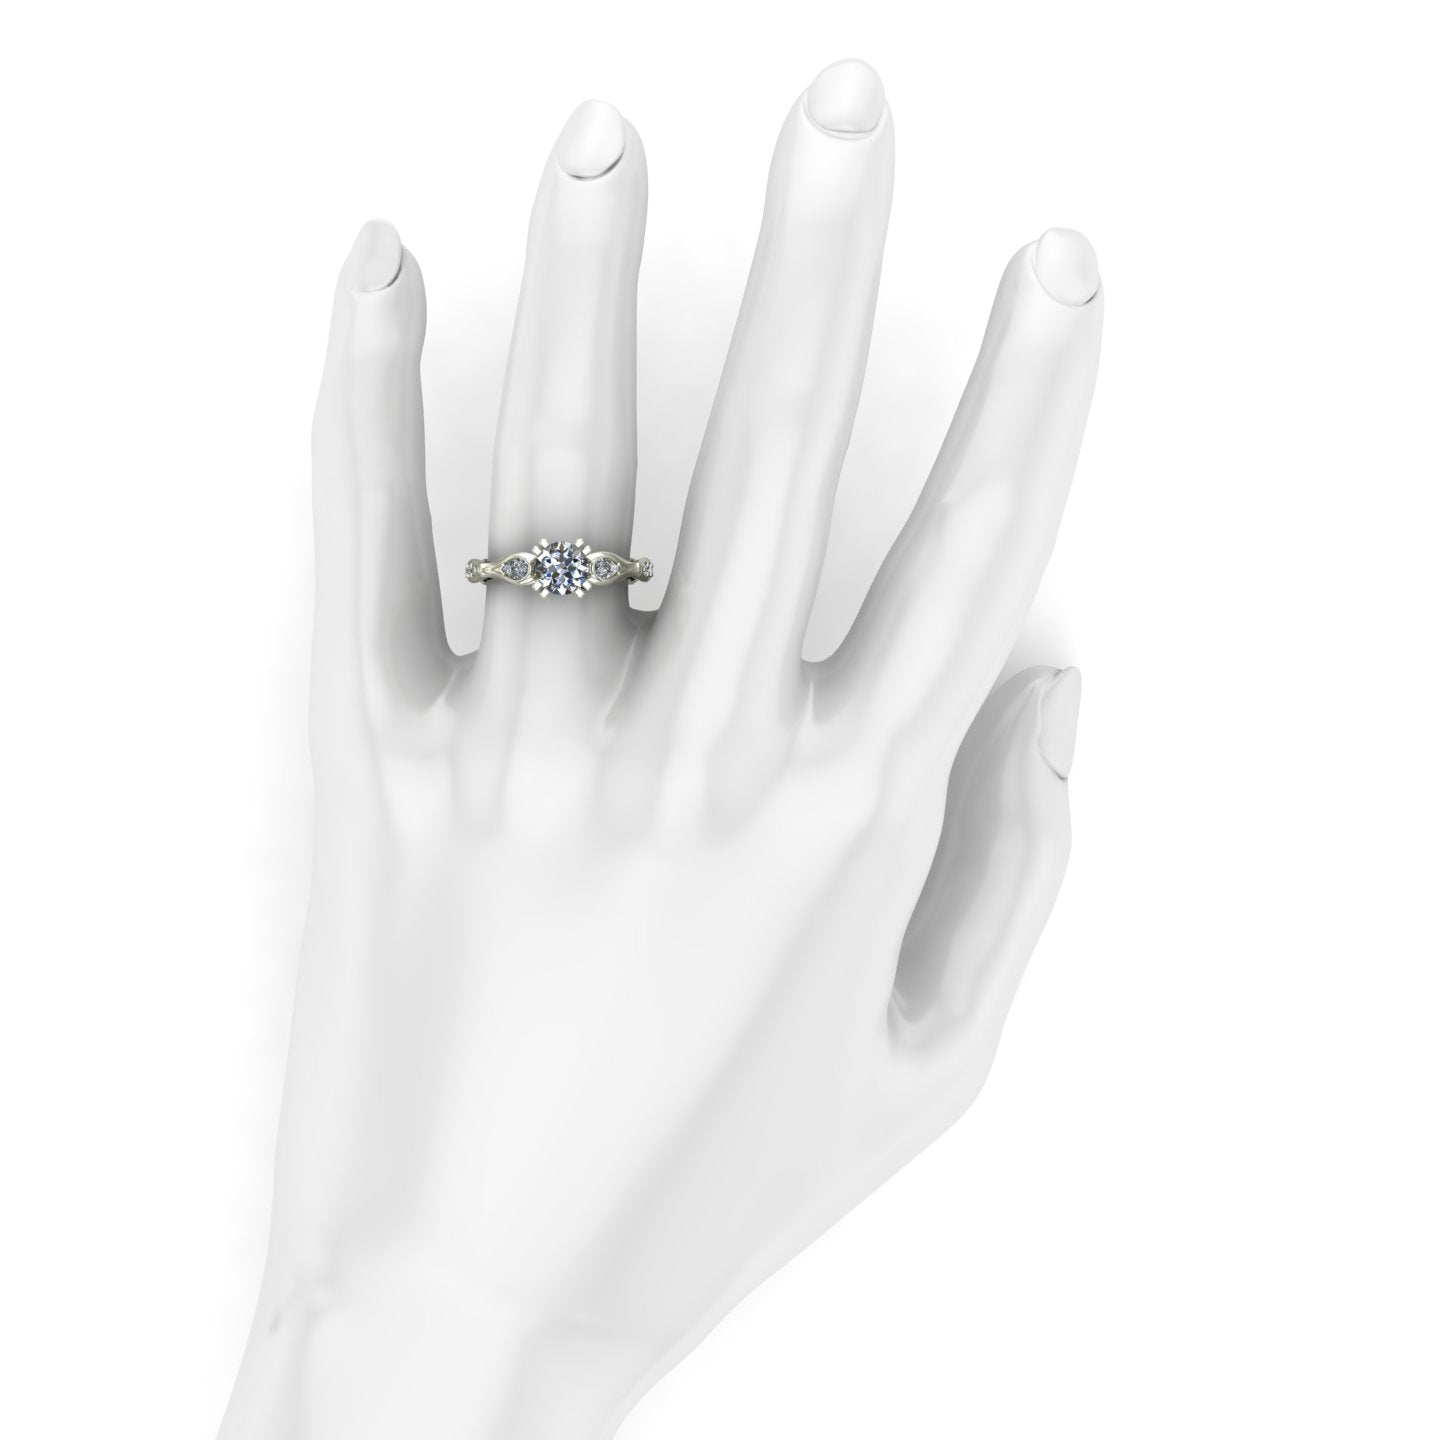 1ct diamond engagement ring with pear sides in 18k white gold - Charles Babb Designs - on hand